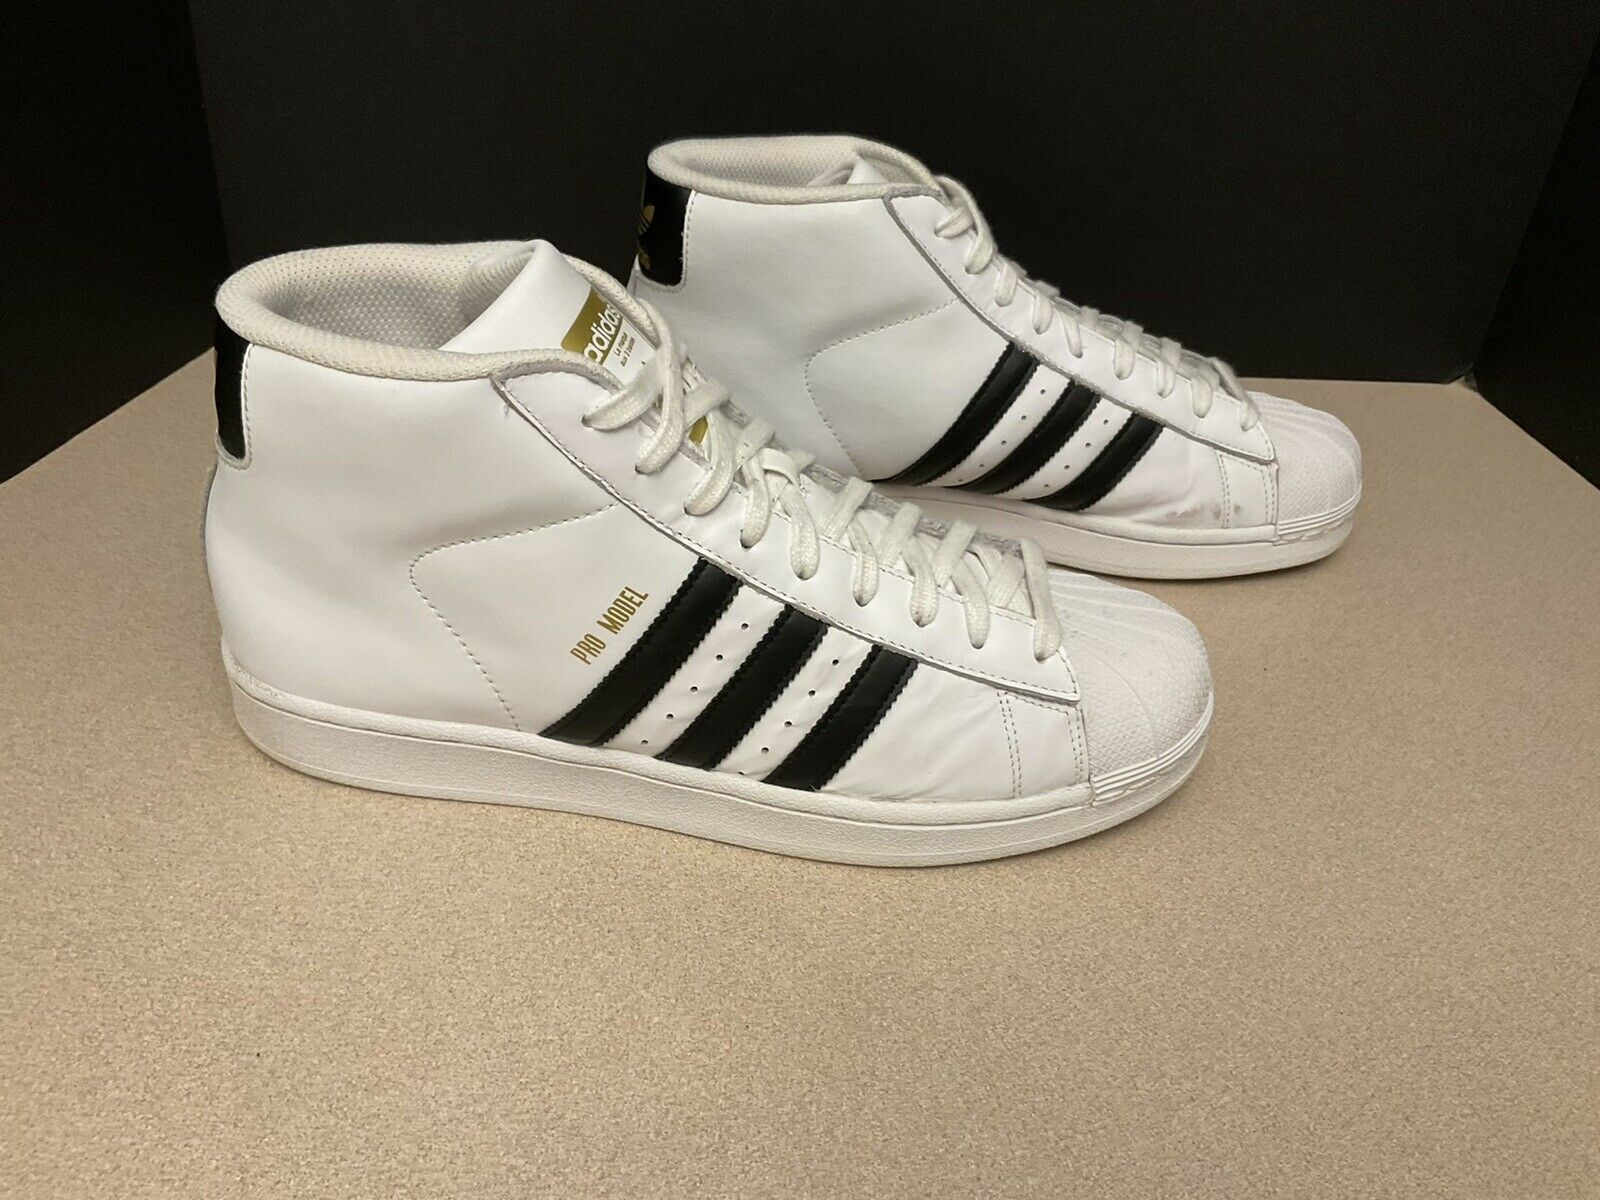 Mens Adidas Pro Model White/Black High Top Shoes. Size 10. Awesome Shoes!!!